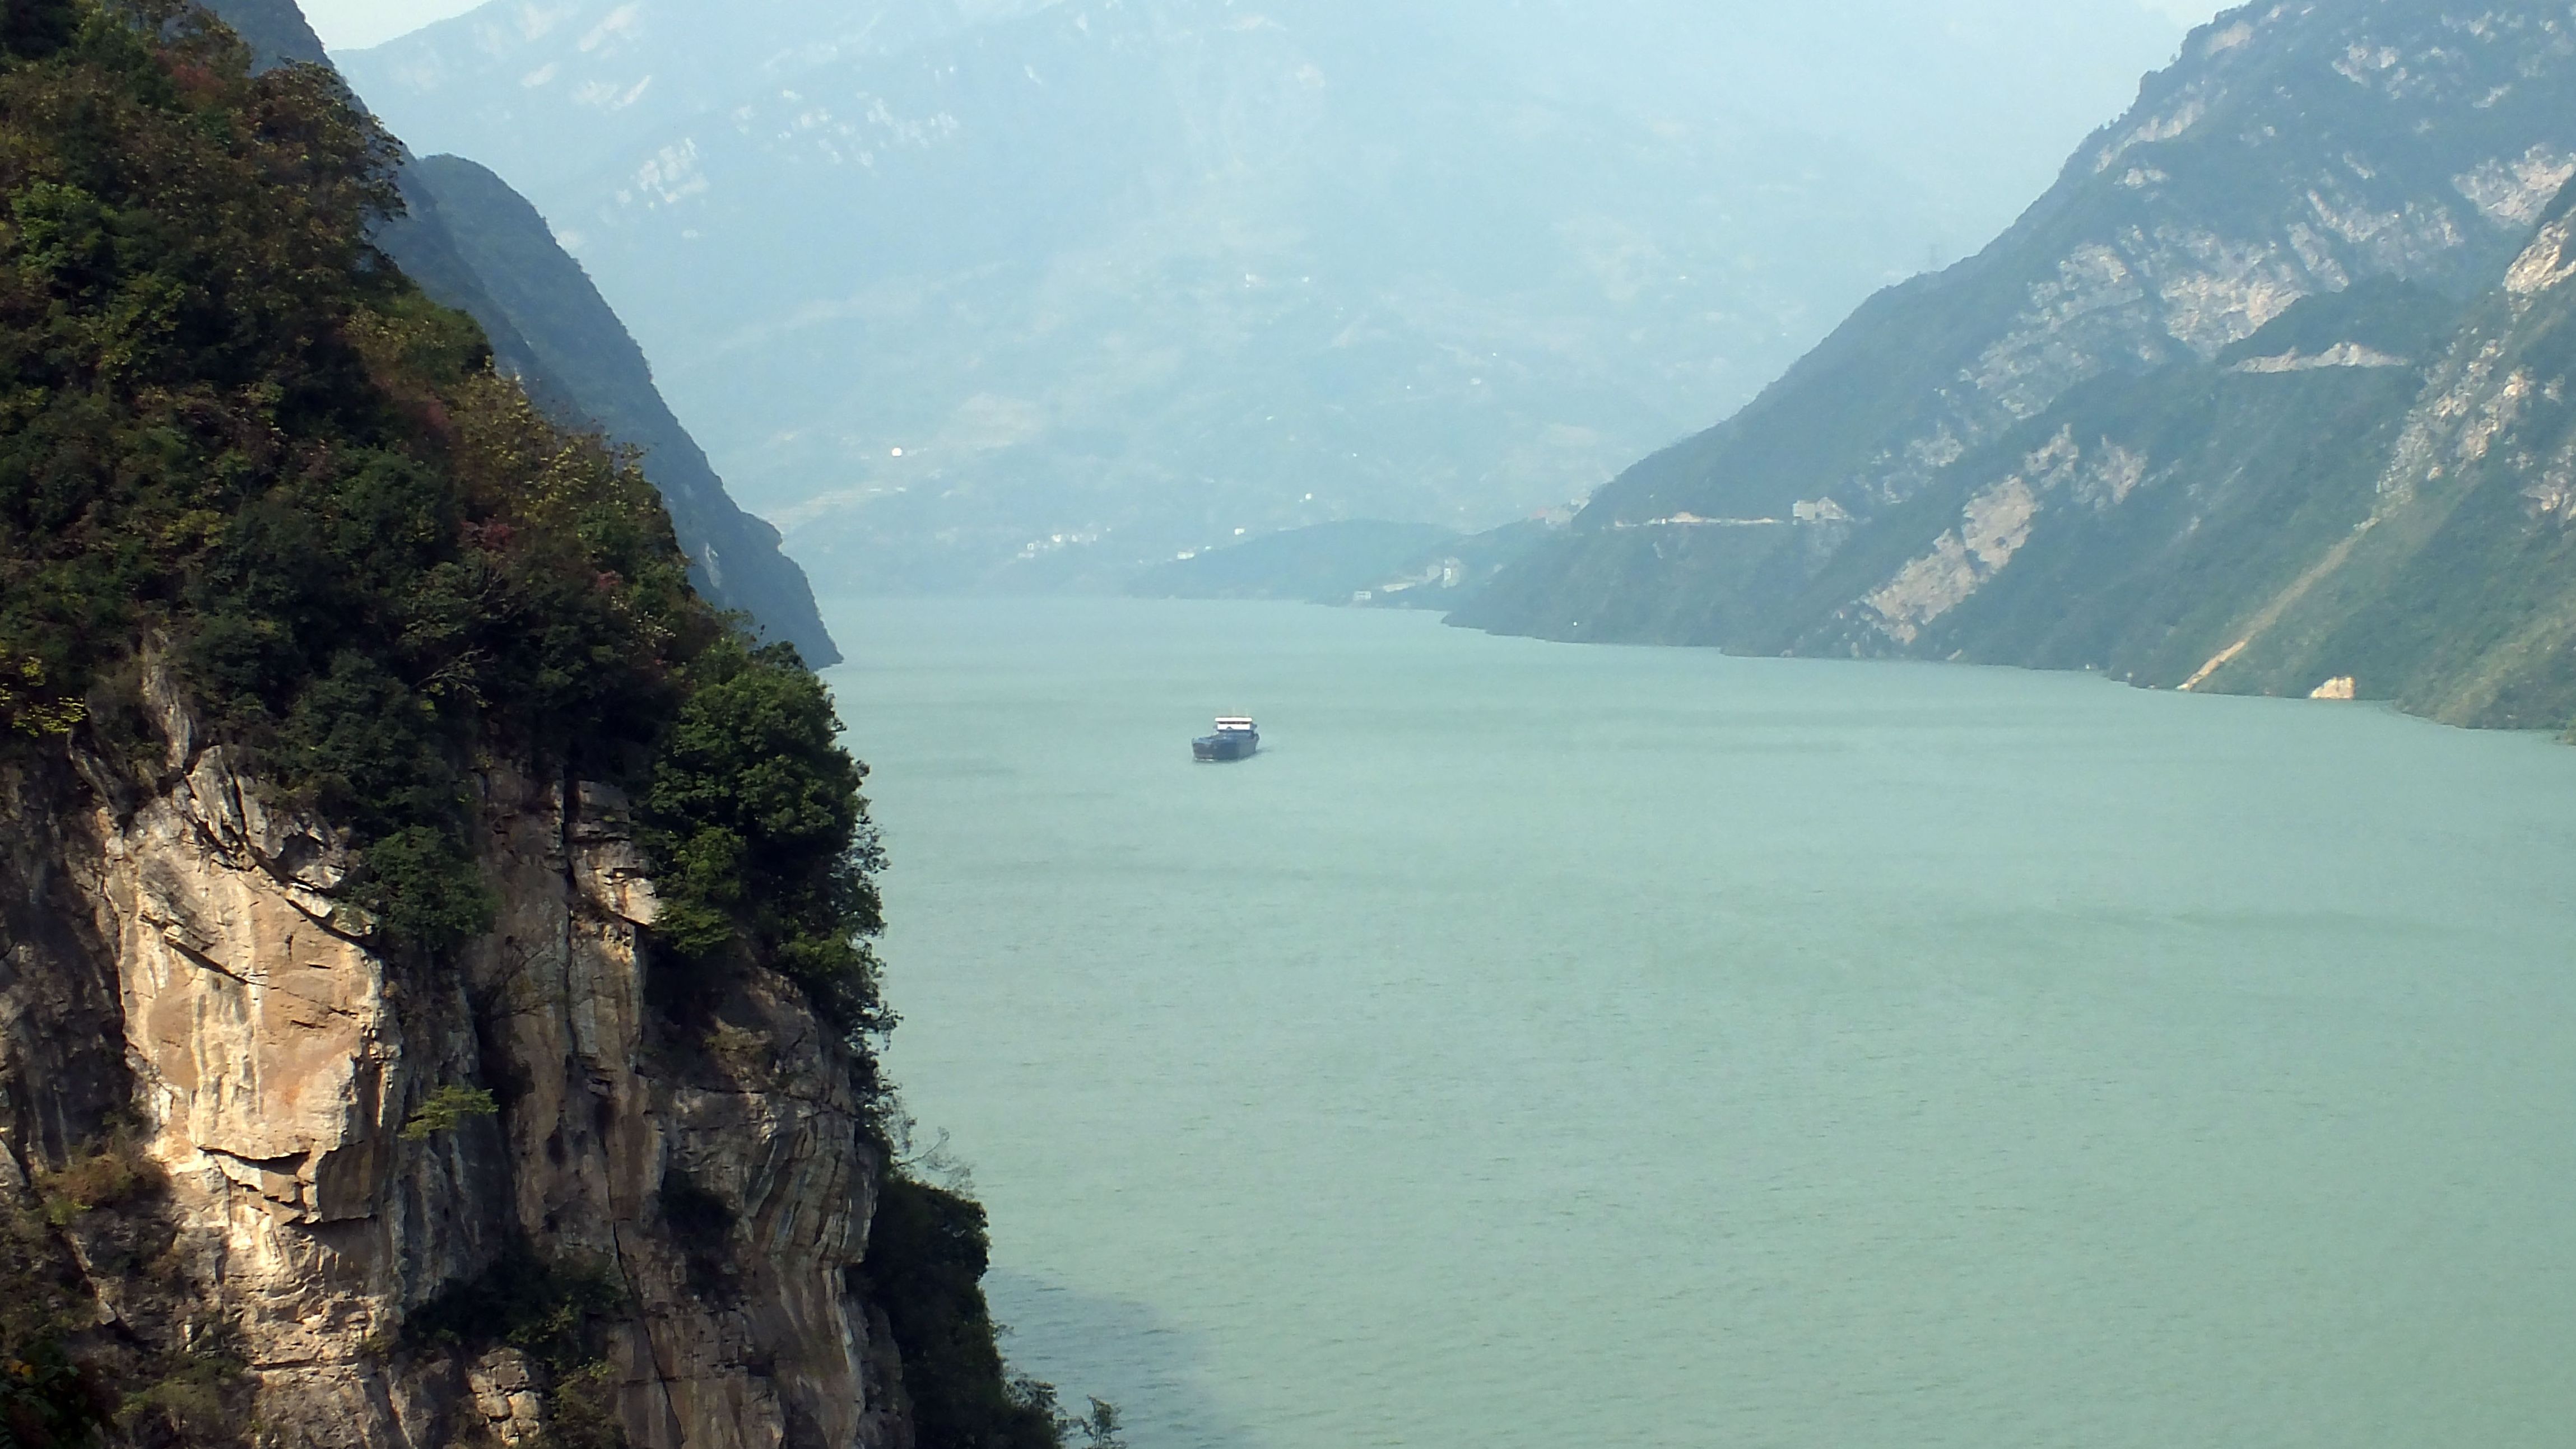 A boat on the Three Gorges reservoir area in Yichang, central China's Hubei province.